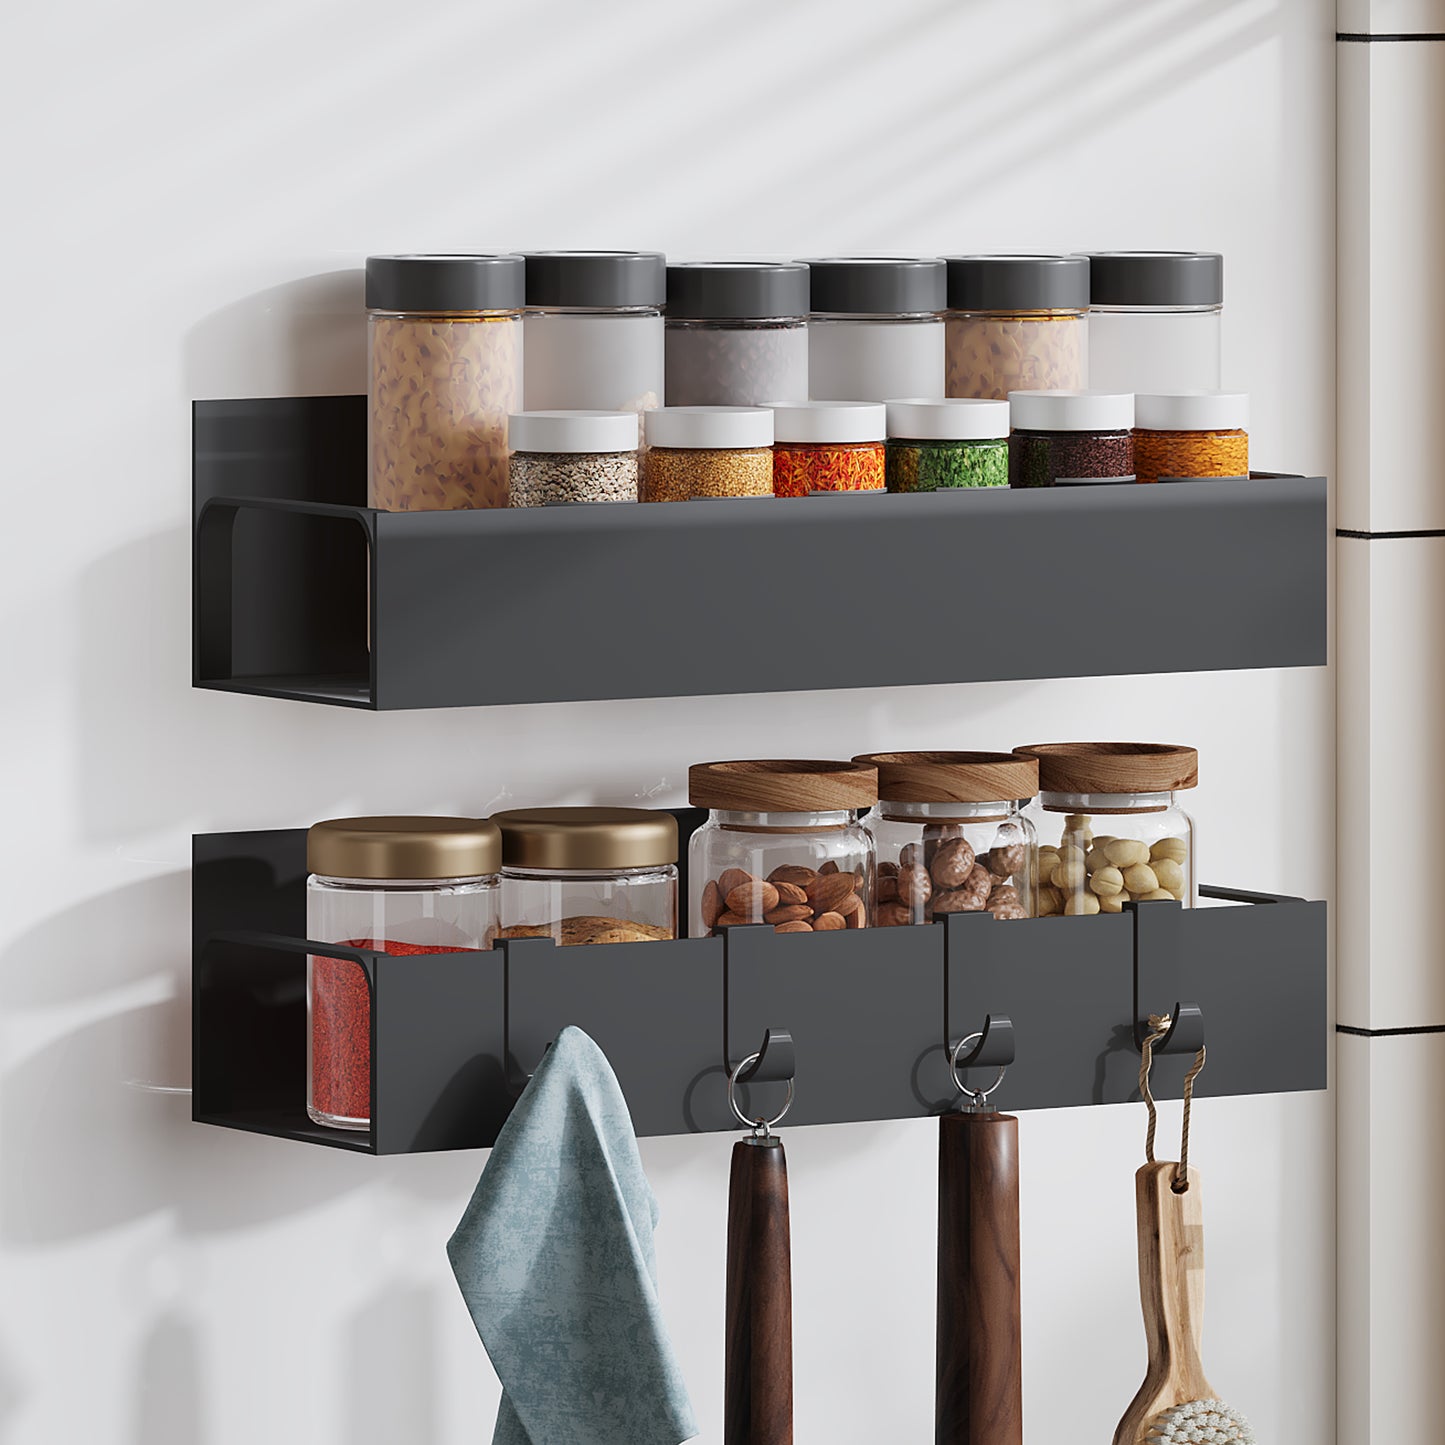 Moveable Magnetic Storage shelf, free shipping, free return delivery within 1-3days